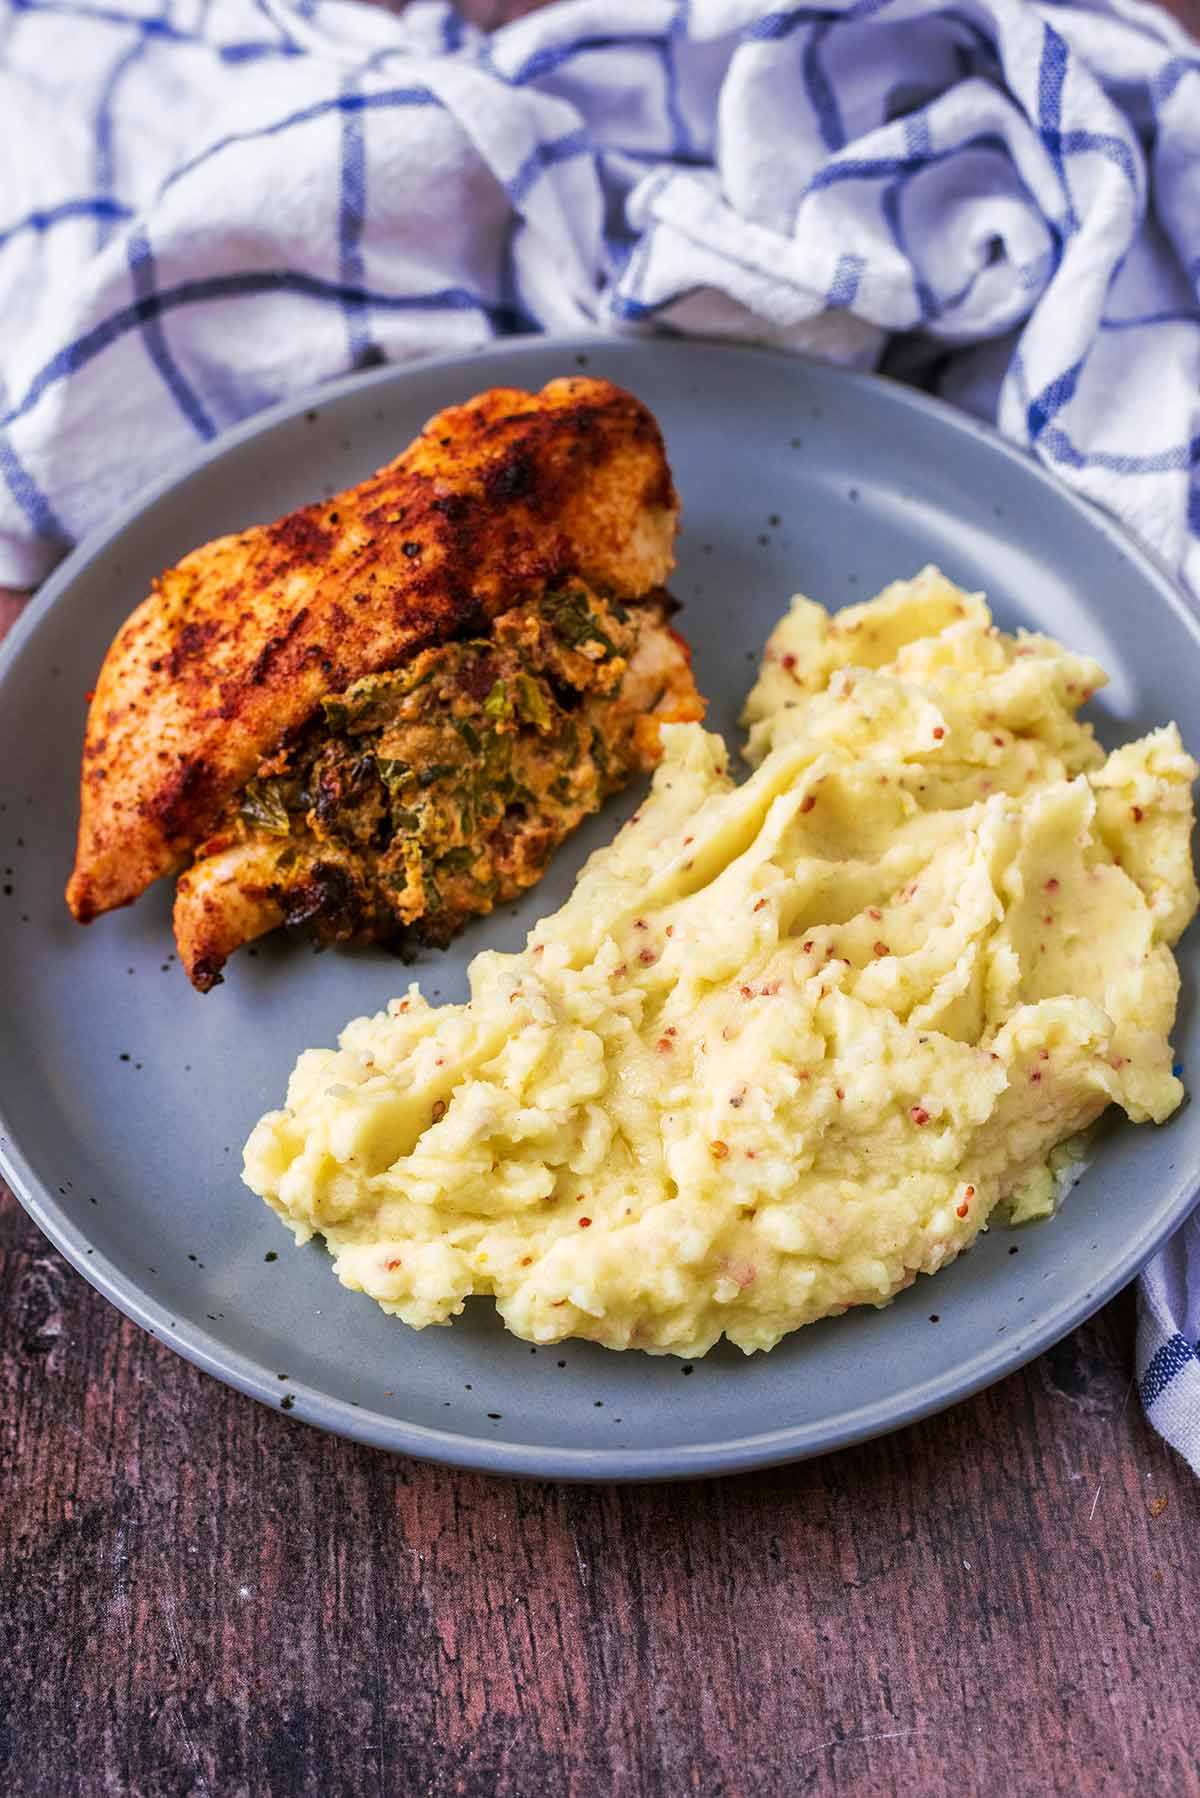 Mashed potato and a cooked chicken breast on a plate.